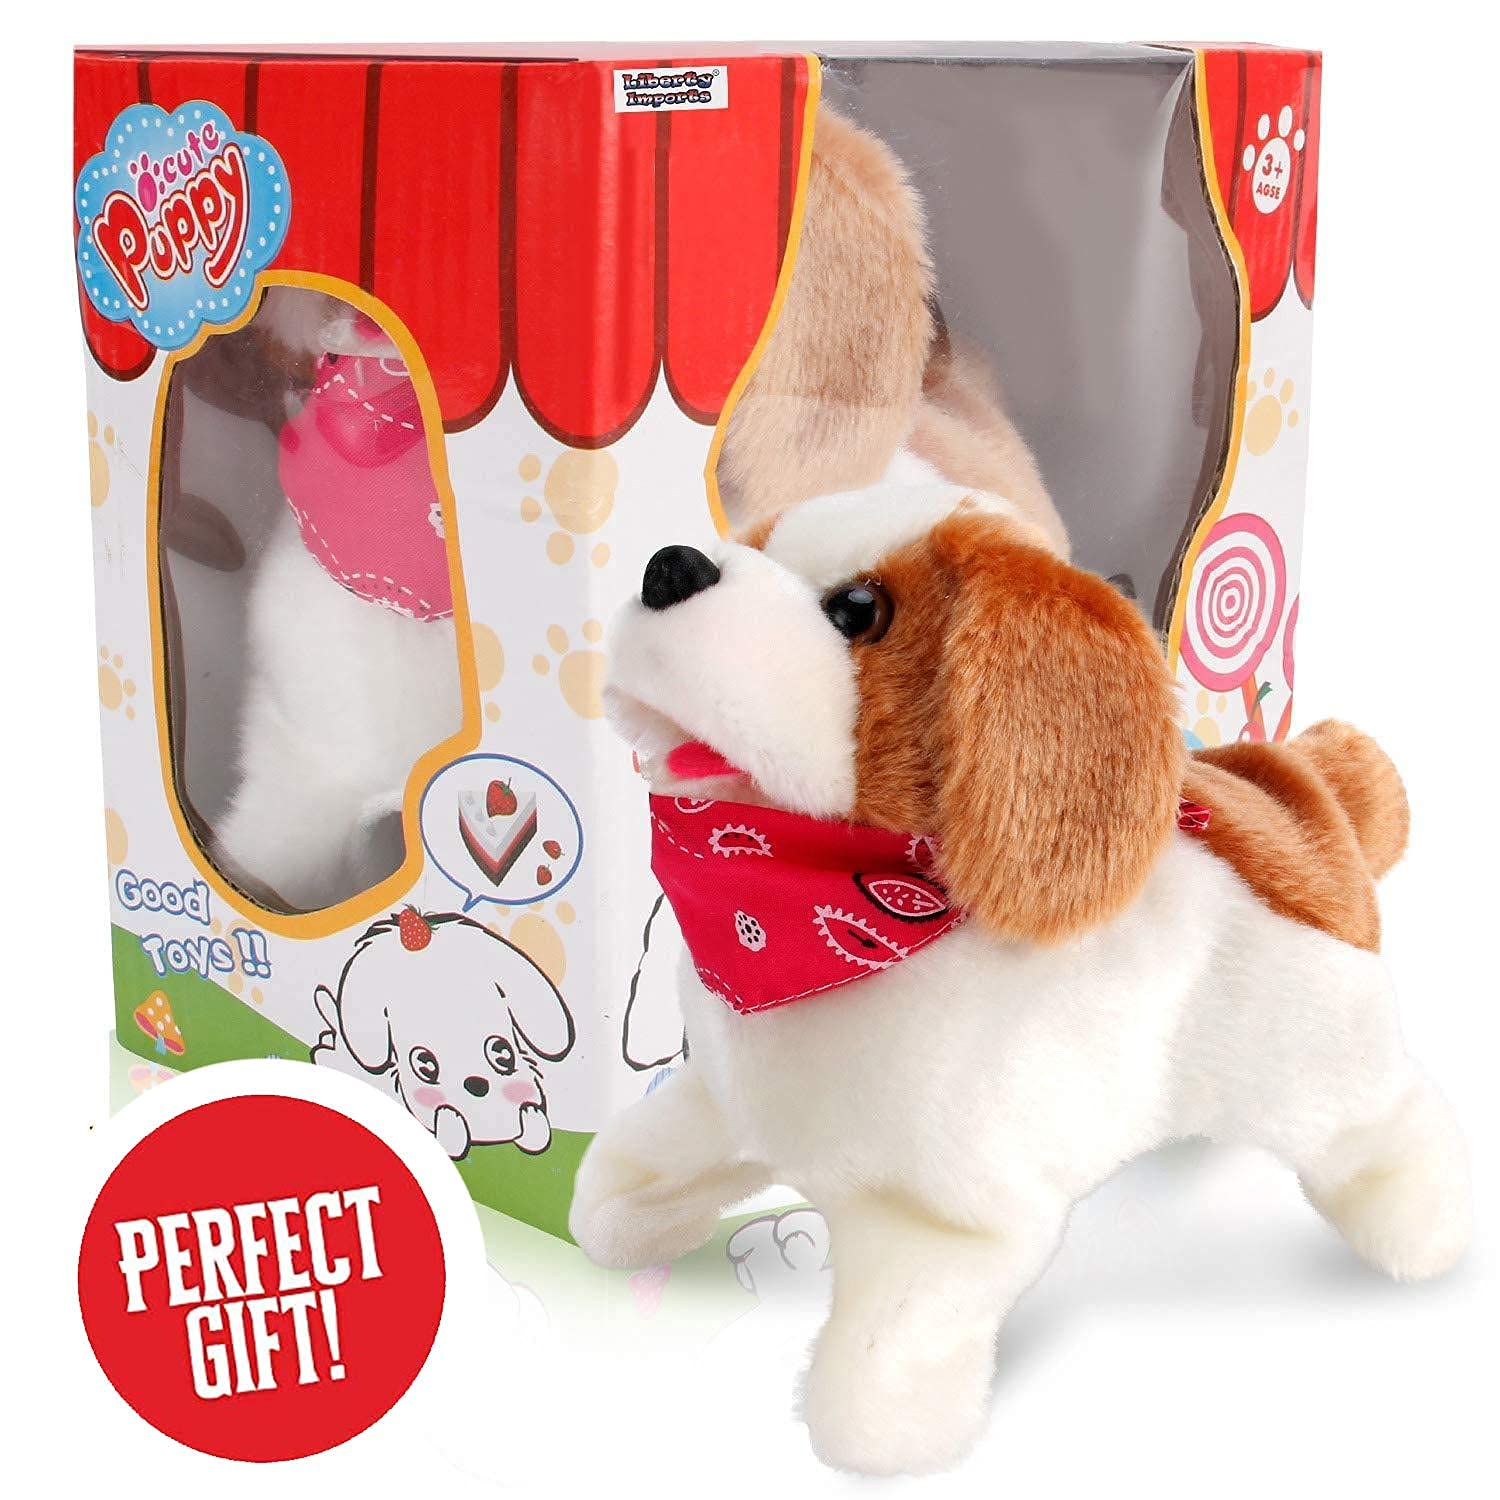 Liberty Imports Cute Little Puppy - Flip Over Dog, Somersaults, Walks, Sits, Barks